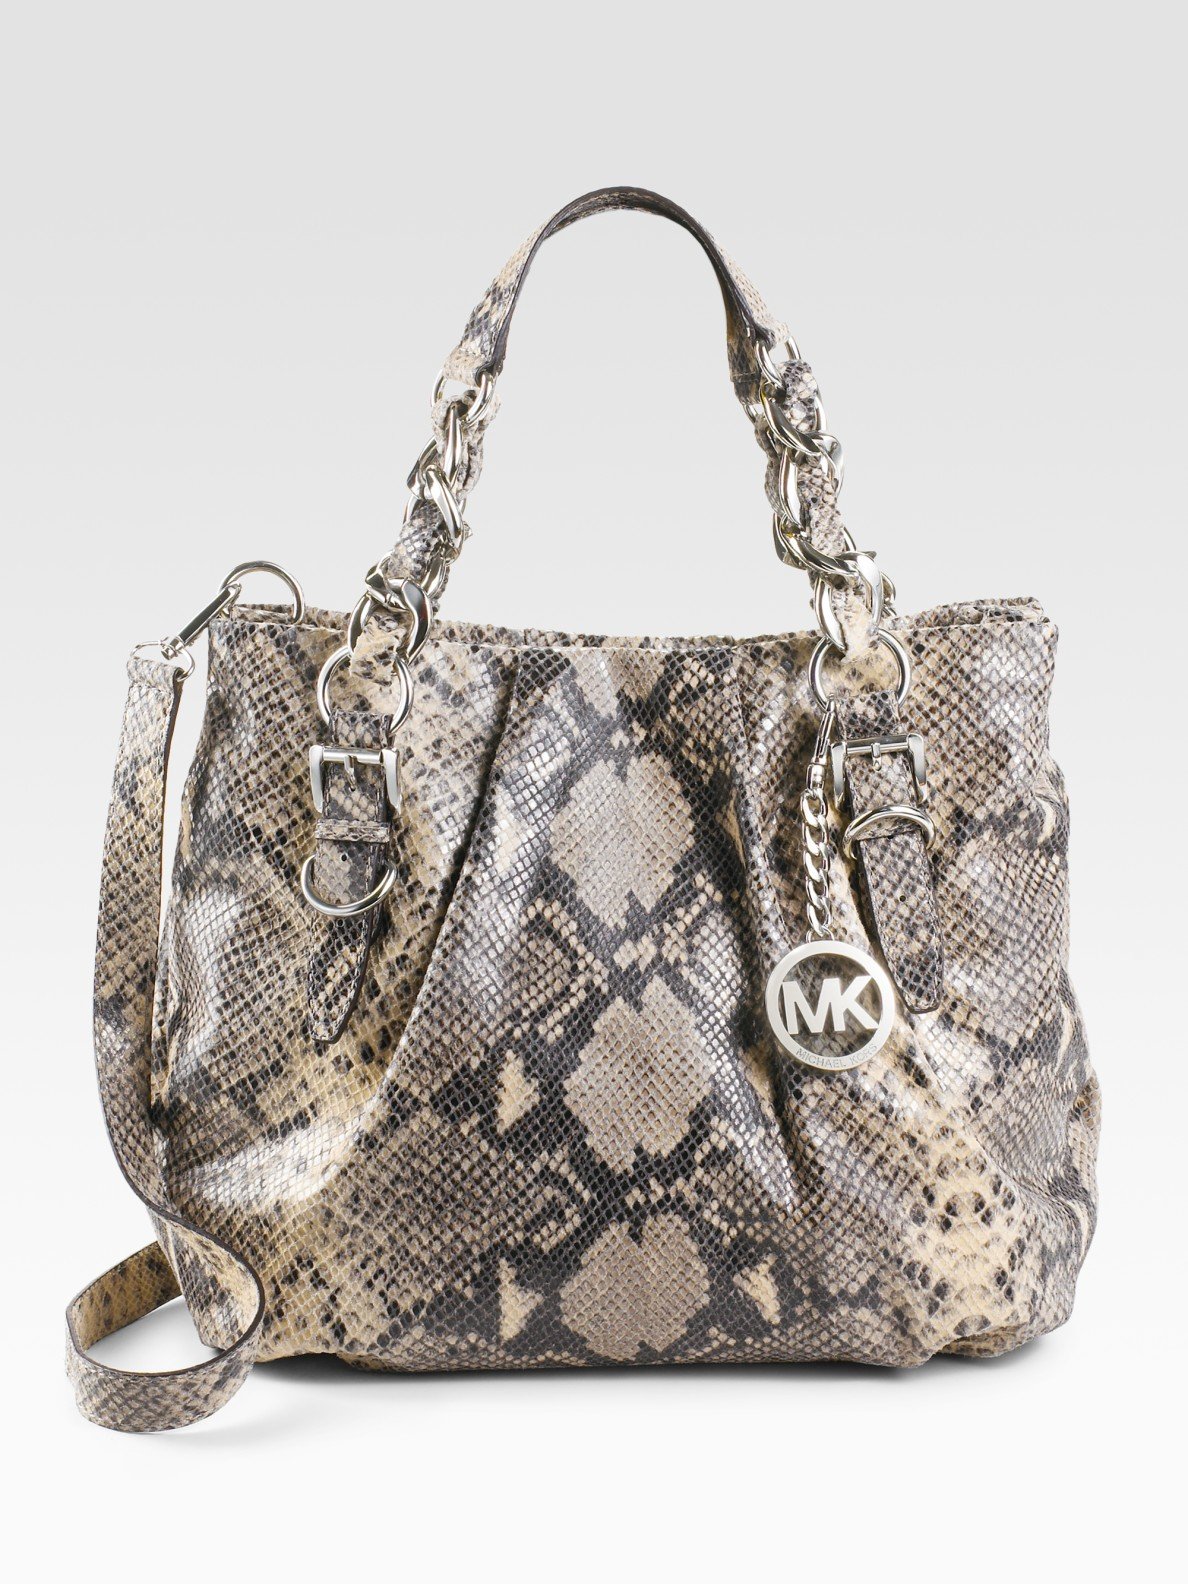 Snake Embossed Leather Bags | IUCN Water